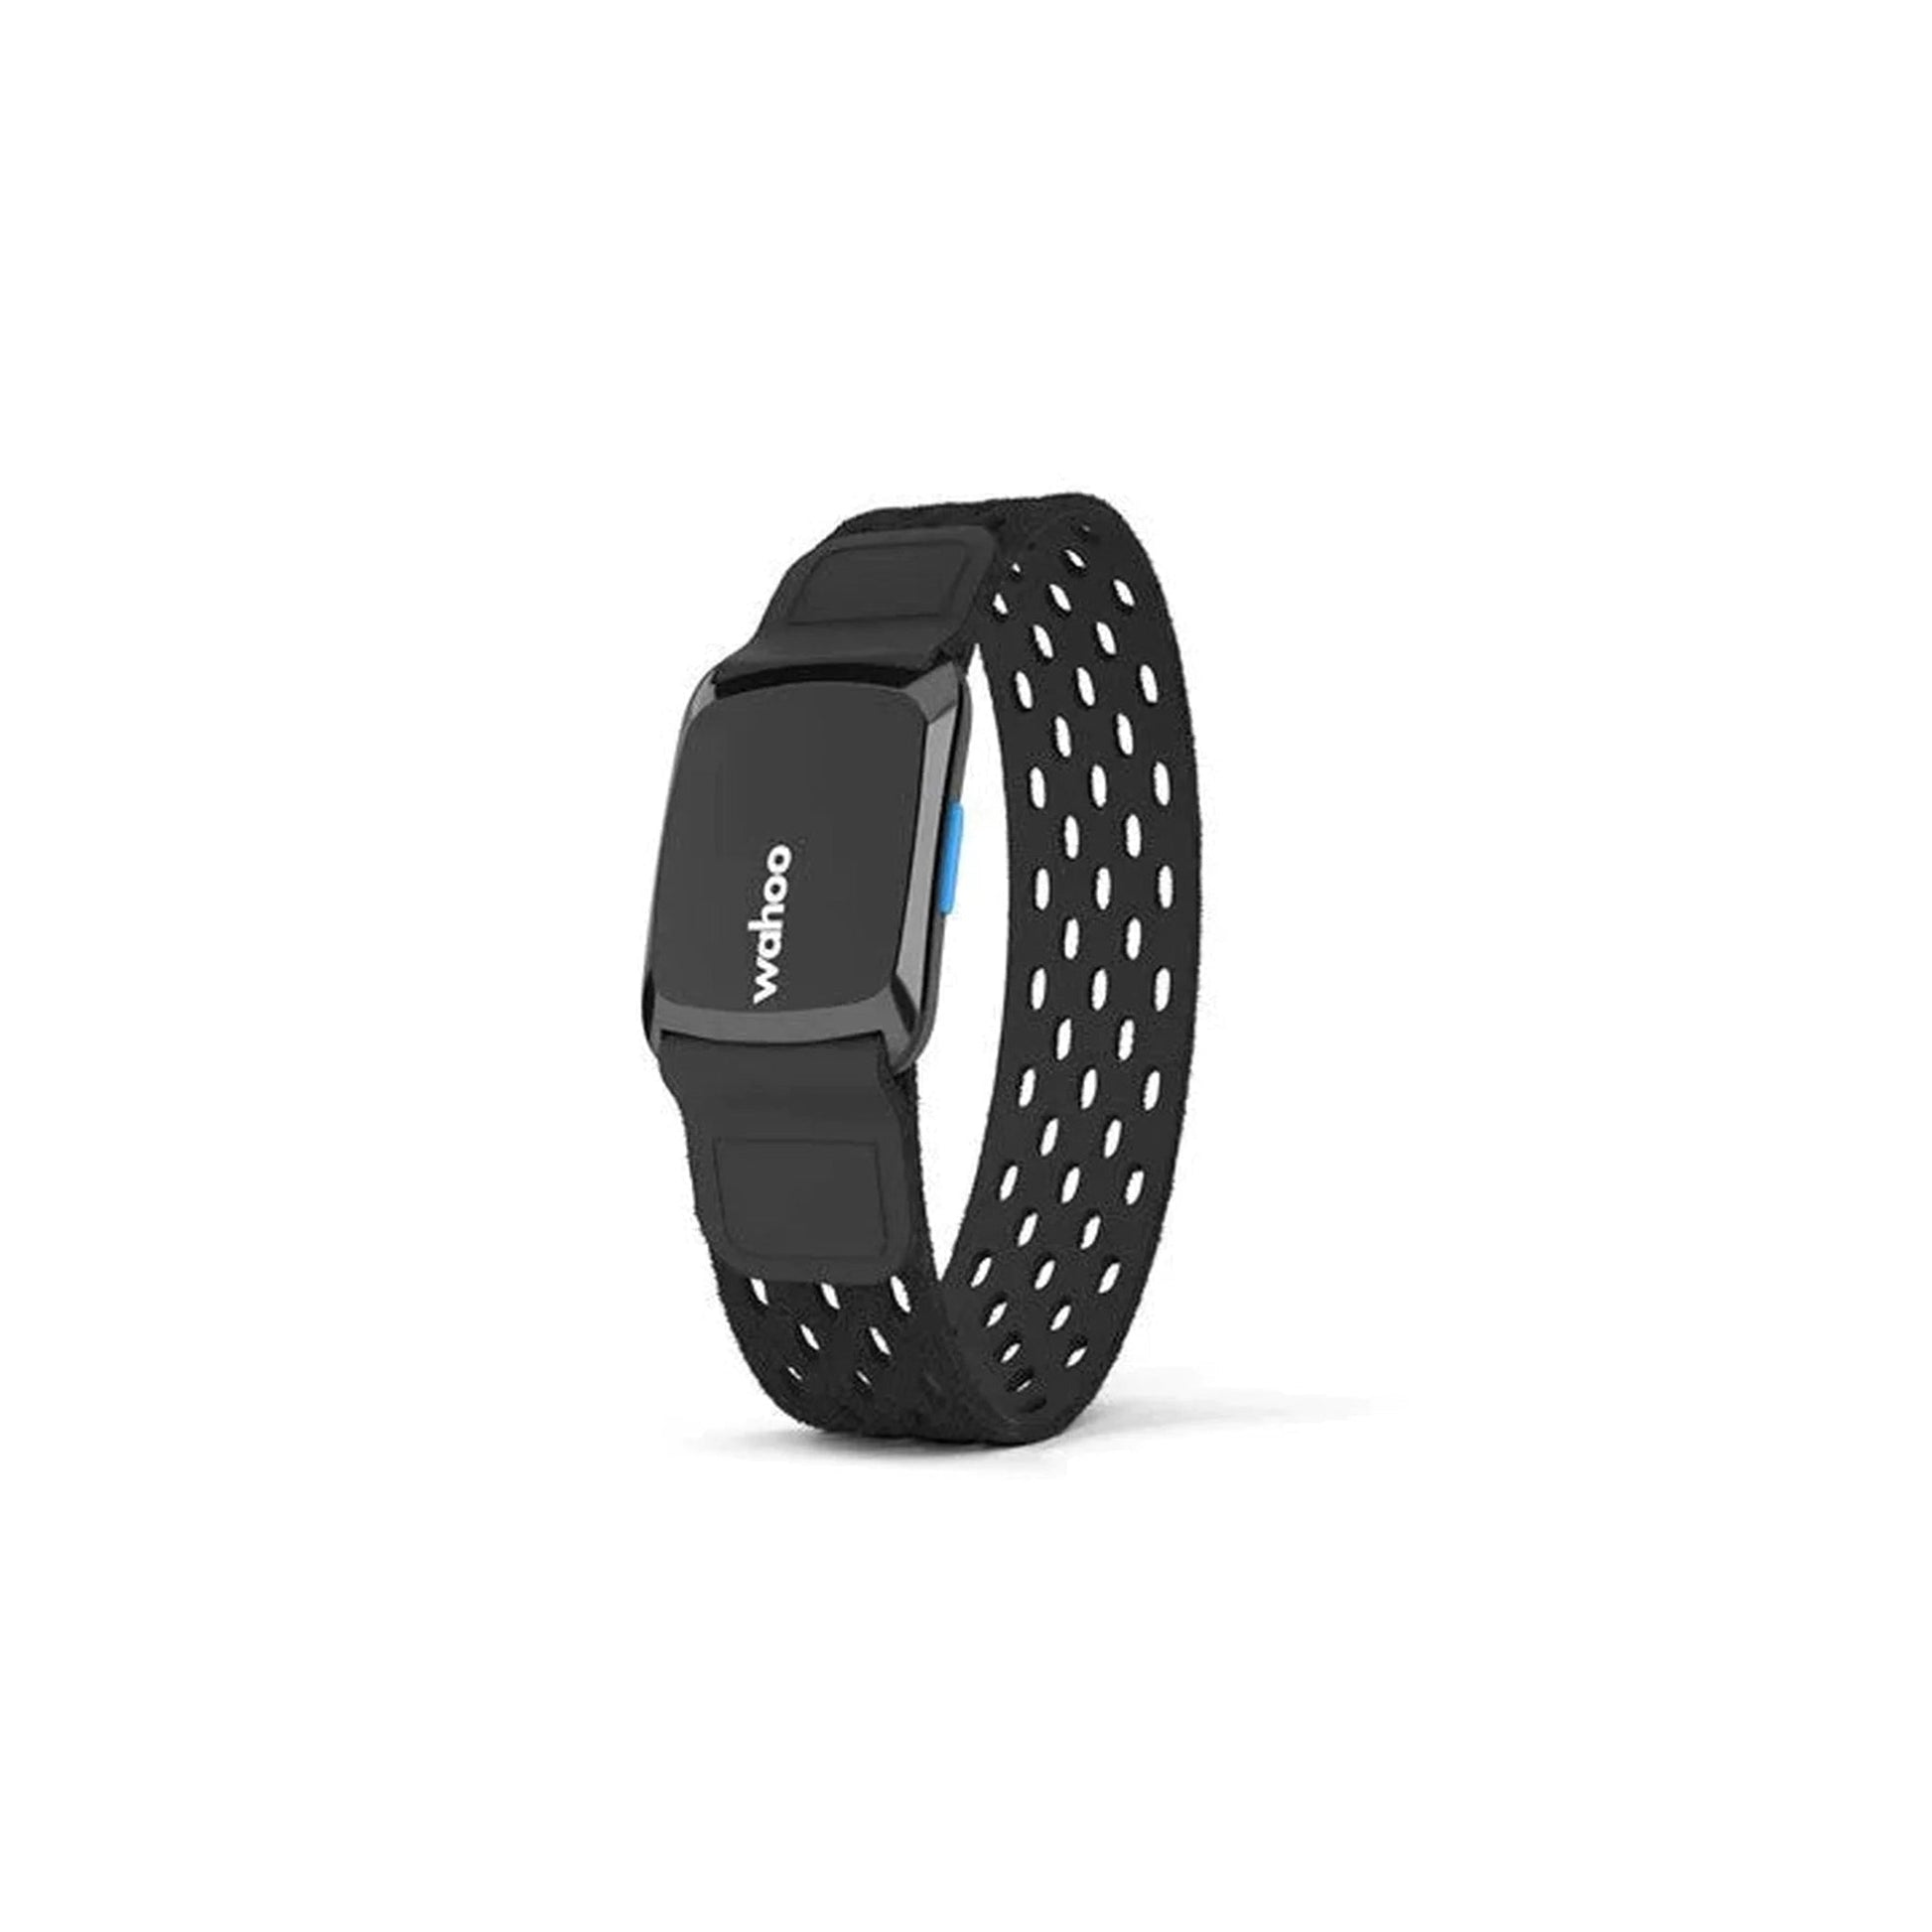 WAHOO TICKR FIT HEART RATE MONITOR-Cycles Direct Specialized